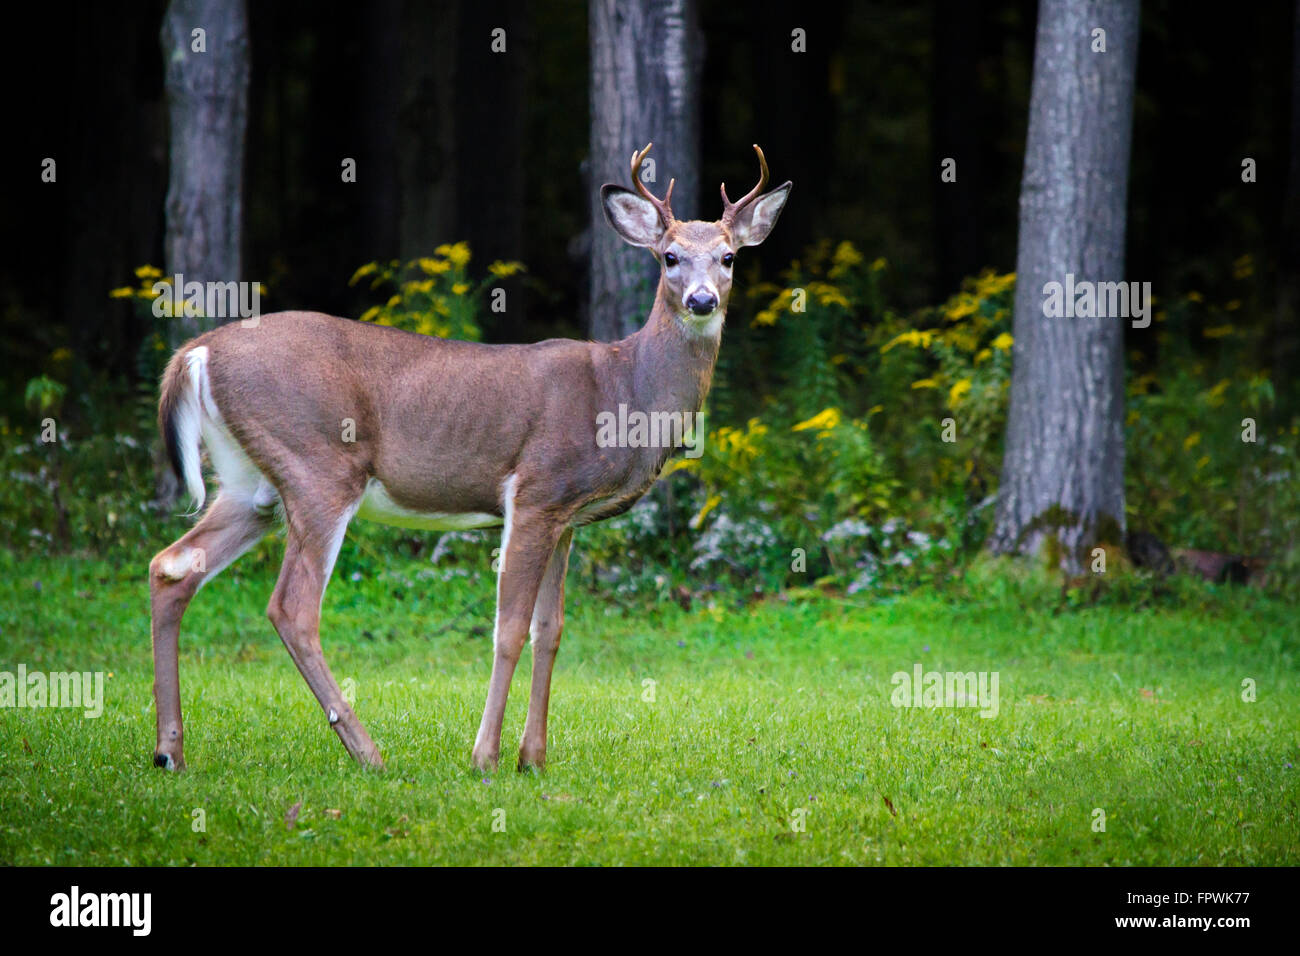 Whitetail deer buck with antlers close up Stock Photo